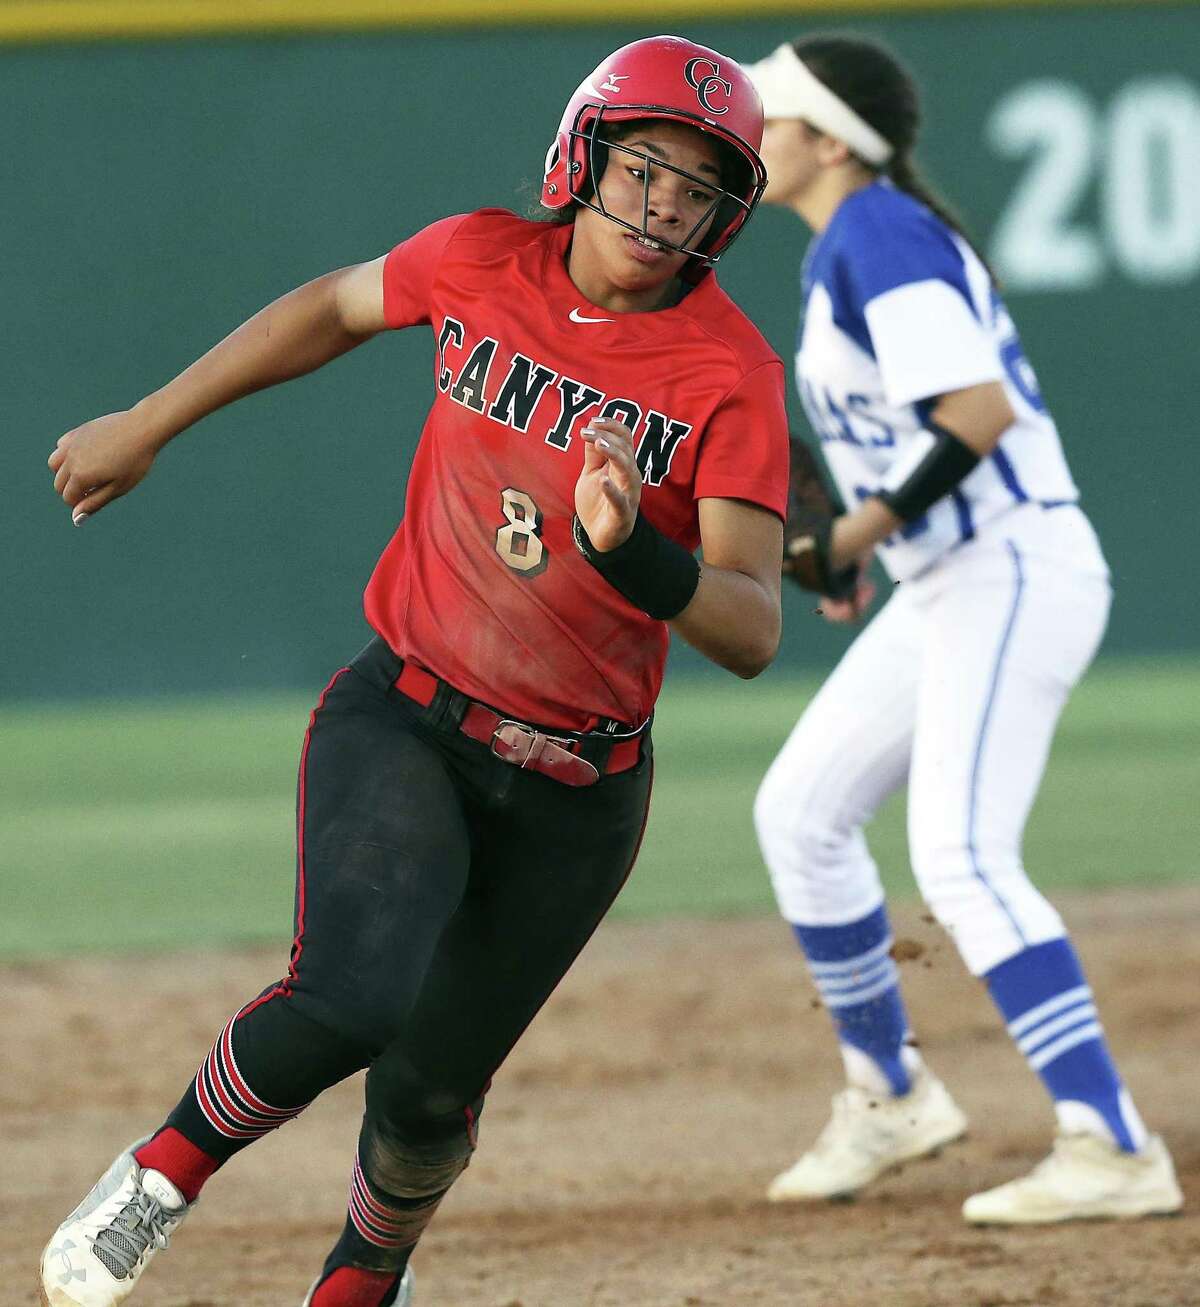 Aliyah Pritchett rounds second base in the early innings as Canyon plays MacArthur in clas 6A second round softball playoffs on May 5, 2017.